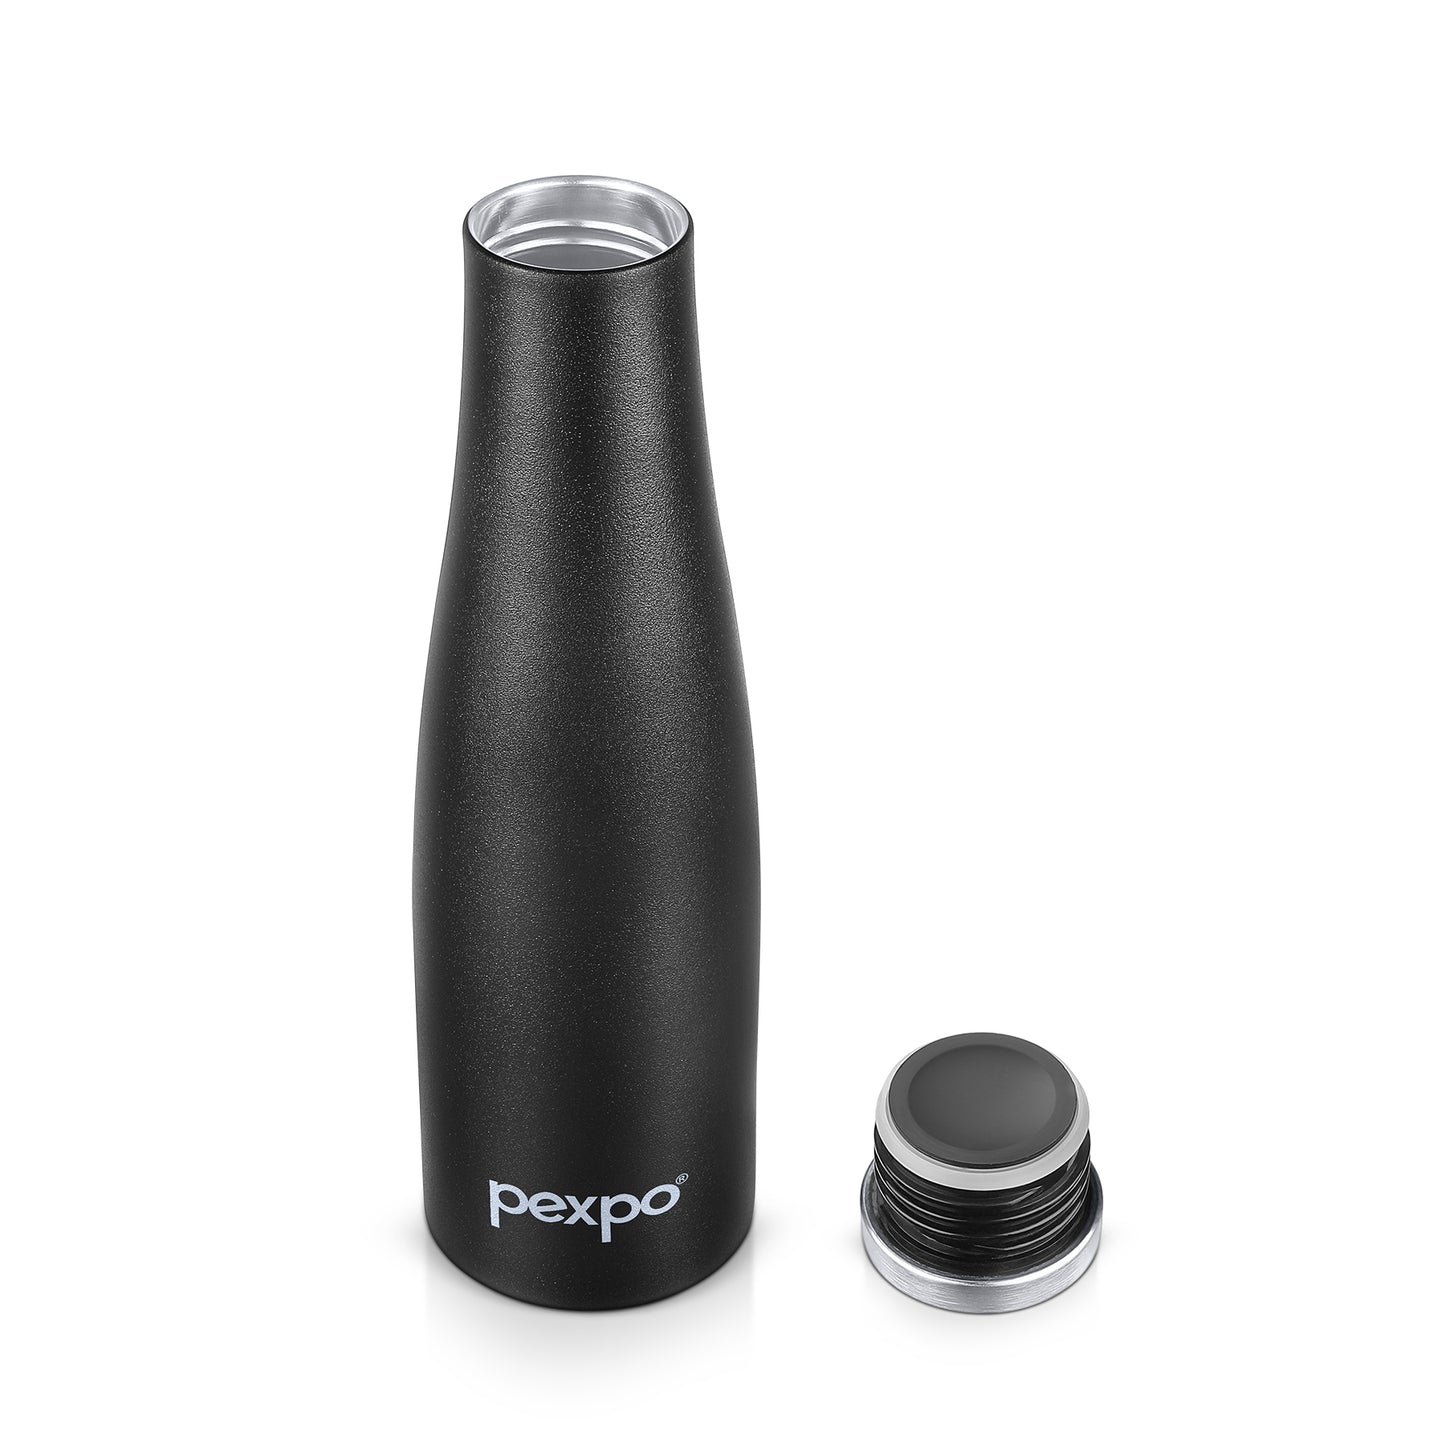 Pexpo Mexico- Stainless Steel Hot and Cold Vacuum Insulated Flask | Lightweight & Keeps Drinks Hot/Cold for 24+ Hours